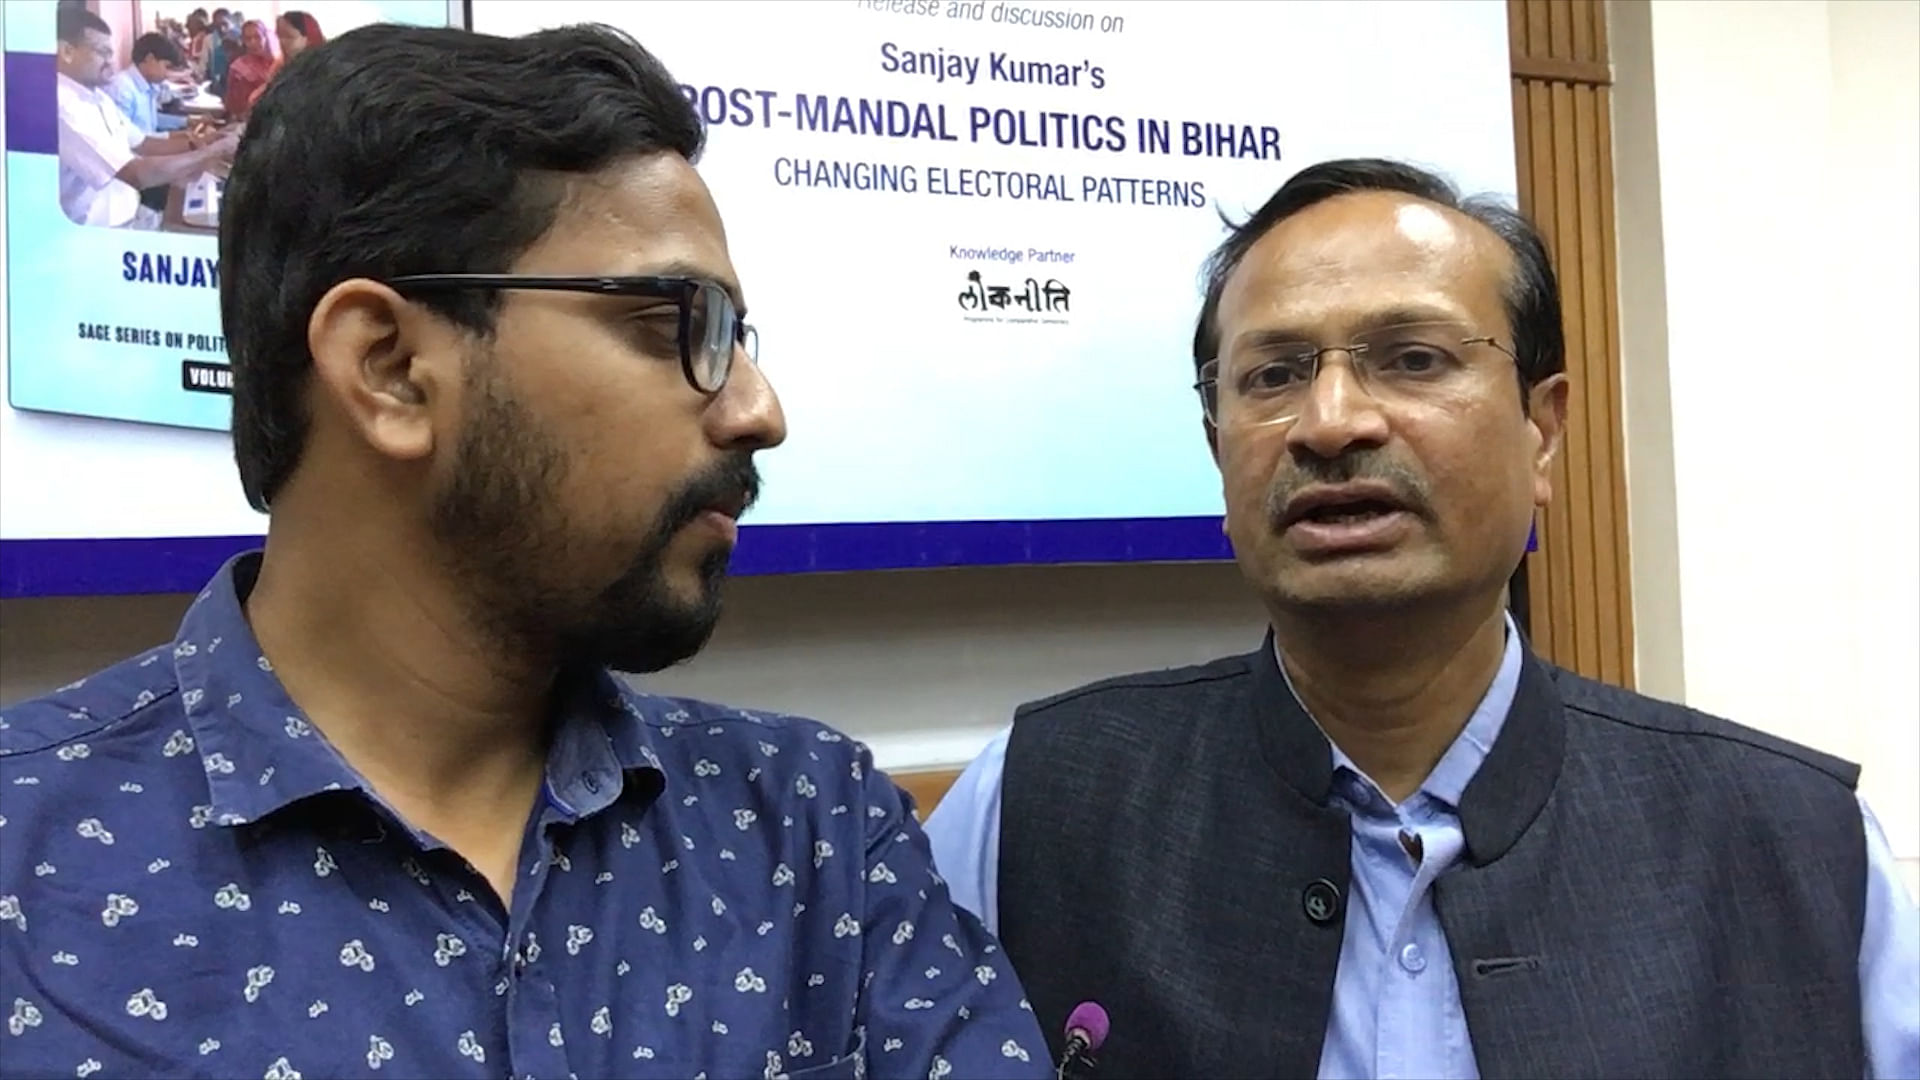 Sanjay Kumar, Director of CSDS, claimed BJP may lose voters in 2019 elections.